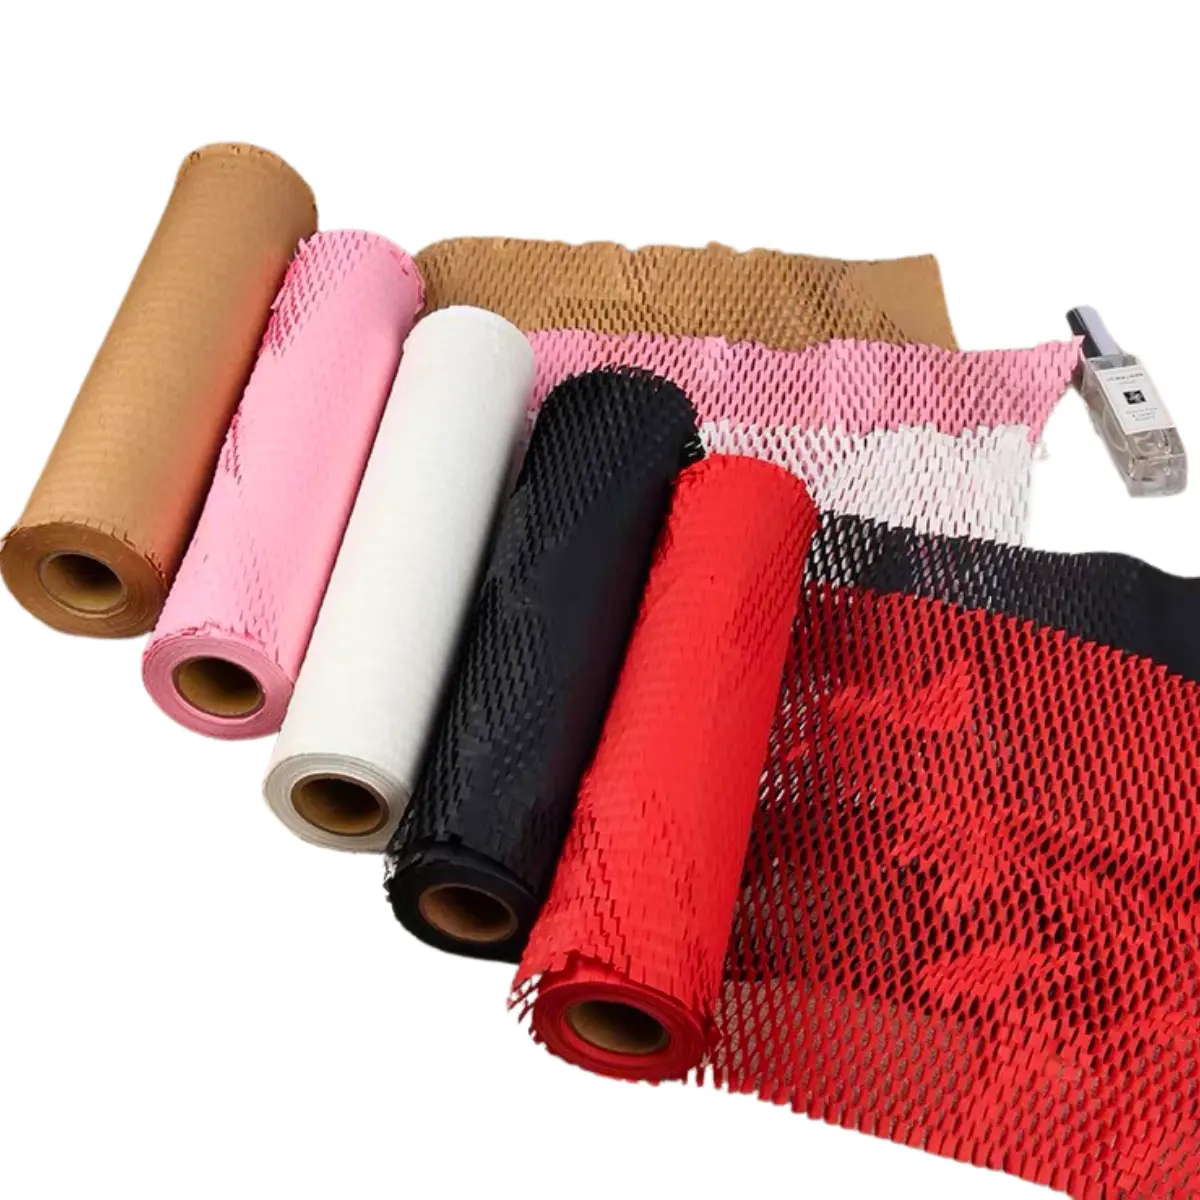 OEM/ODM Strong Honeycomb Paper Packaging Rolls Honeycomb Paper Roll Inside Packaging Paper for Gift and Craft